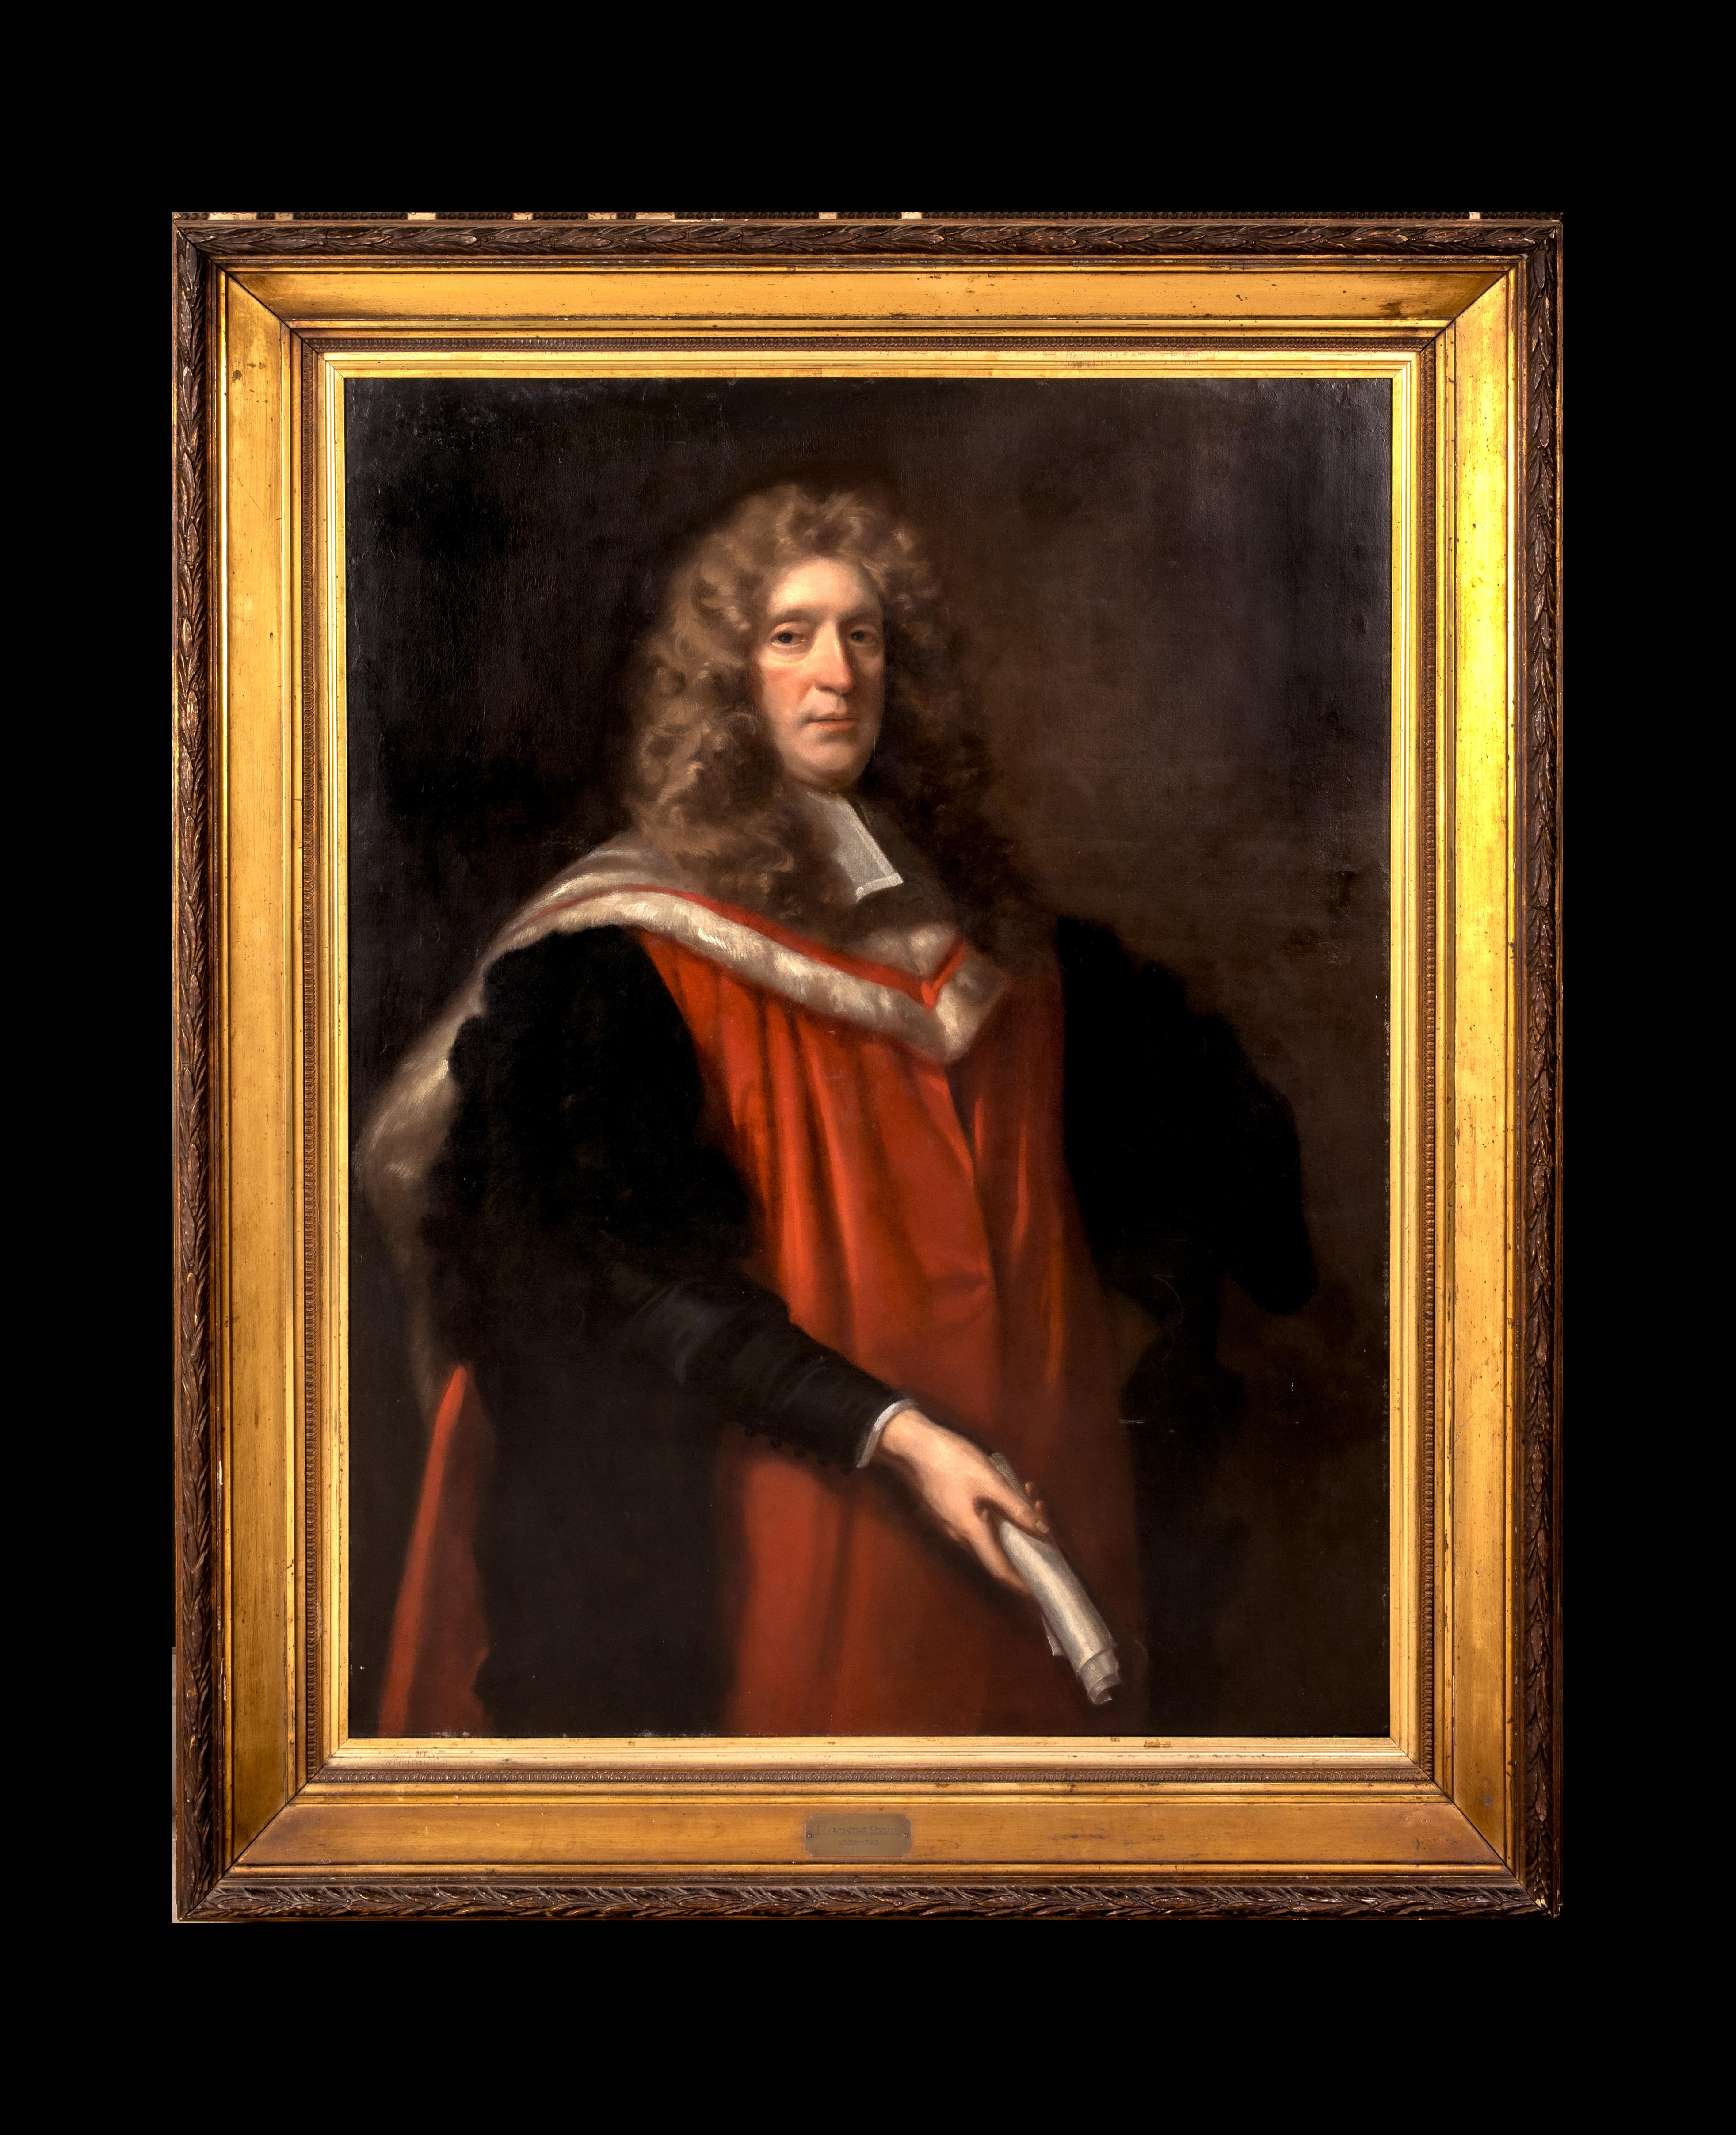 Sir Edward Clarke Lord Mayor Of London (1630-1703), 17th Century  - Painting by Unknown